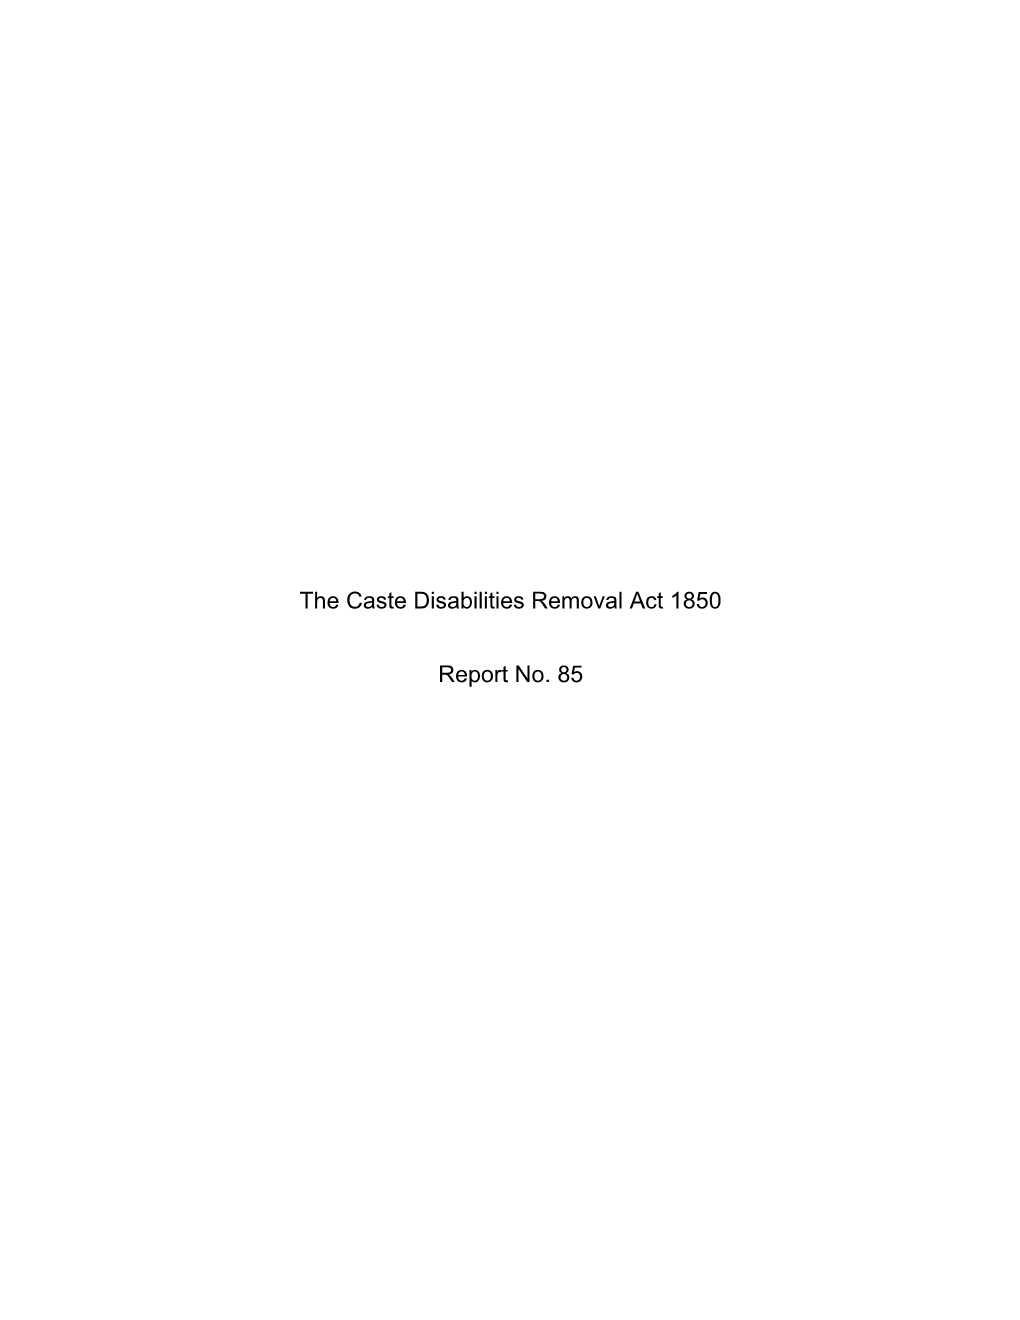 The Caste Disabilities Removal Act 1850